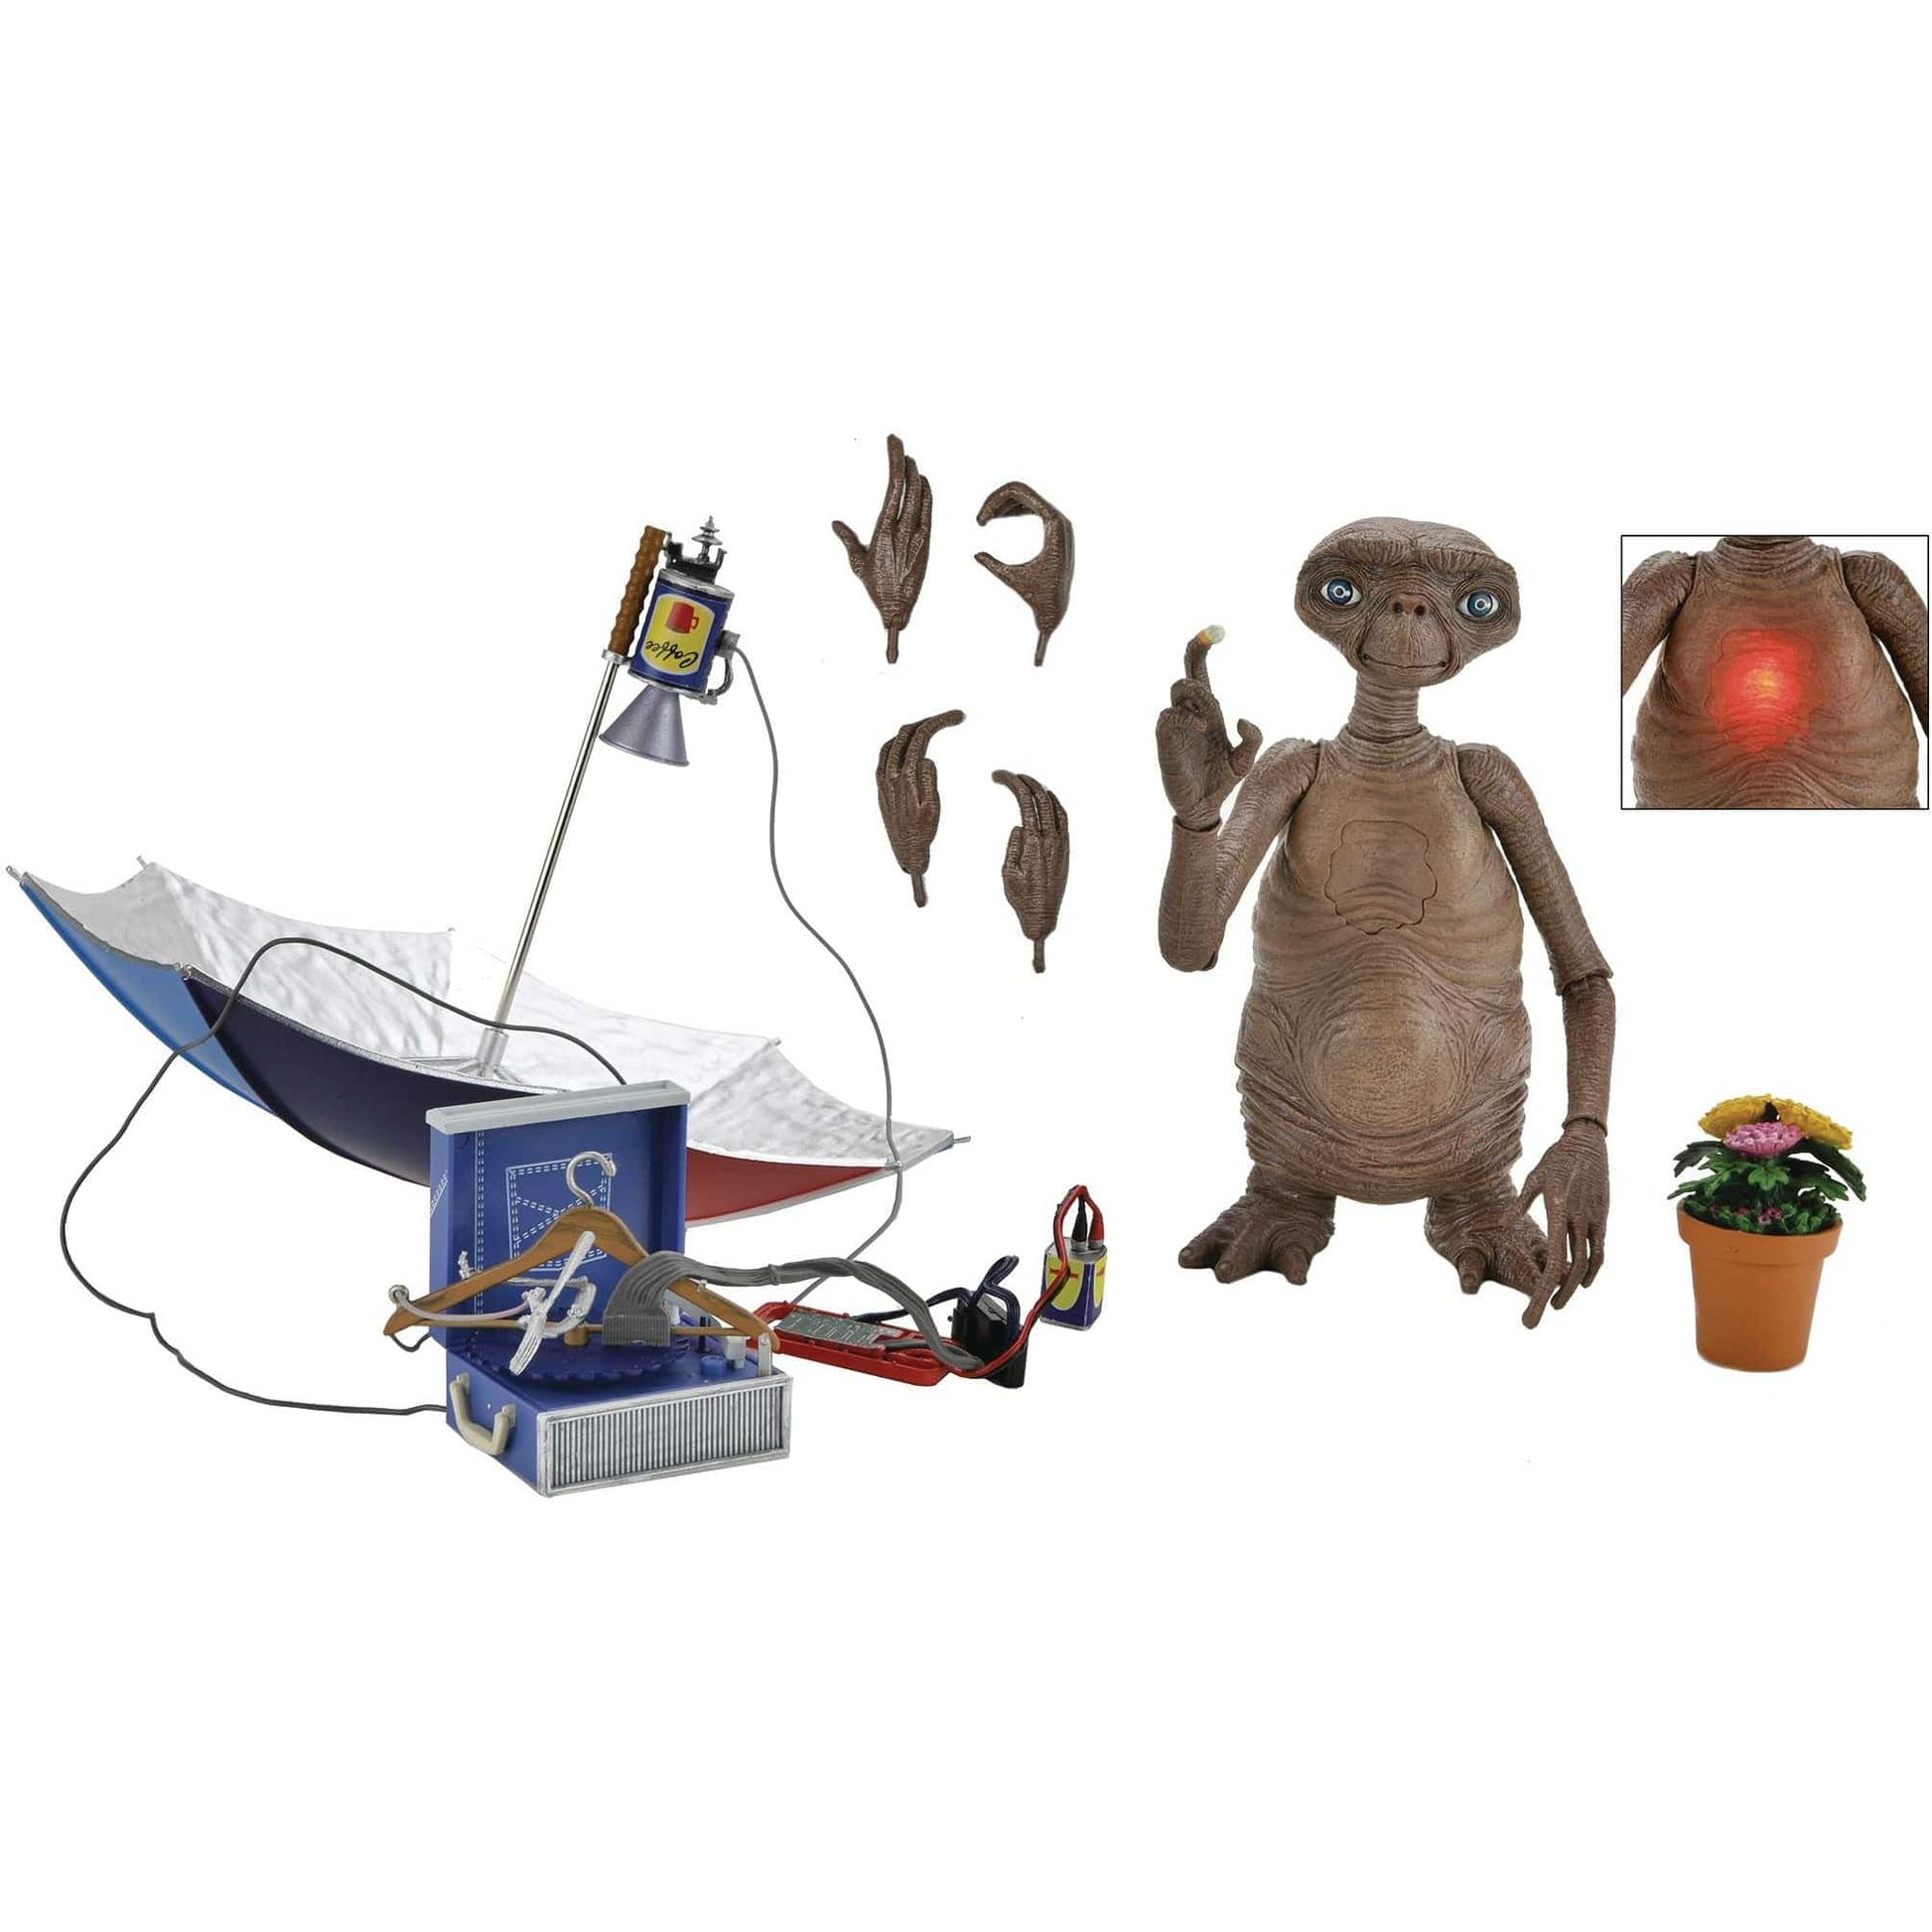 NECA E.T. The Extra Terrestrial Ultimate 7 Inch Action Figure w/LED Chest 40th Anniversary - Redshift7toys.com